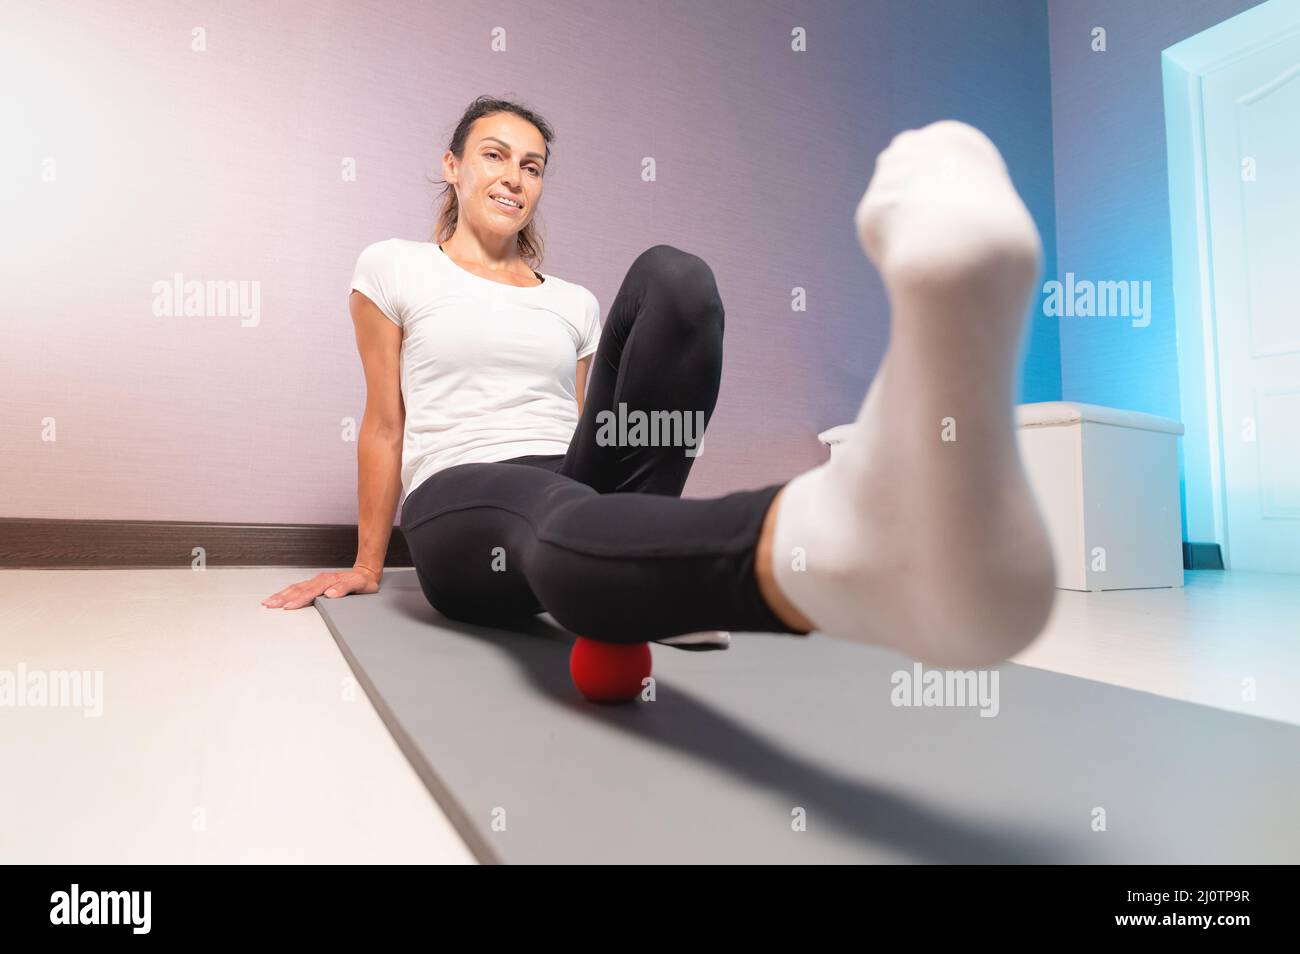 Caucasian woman doing myofascial massage with a massage ball. Myofasceal massage of thighs and gluteal muscles Stock Photo